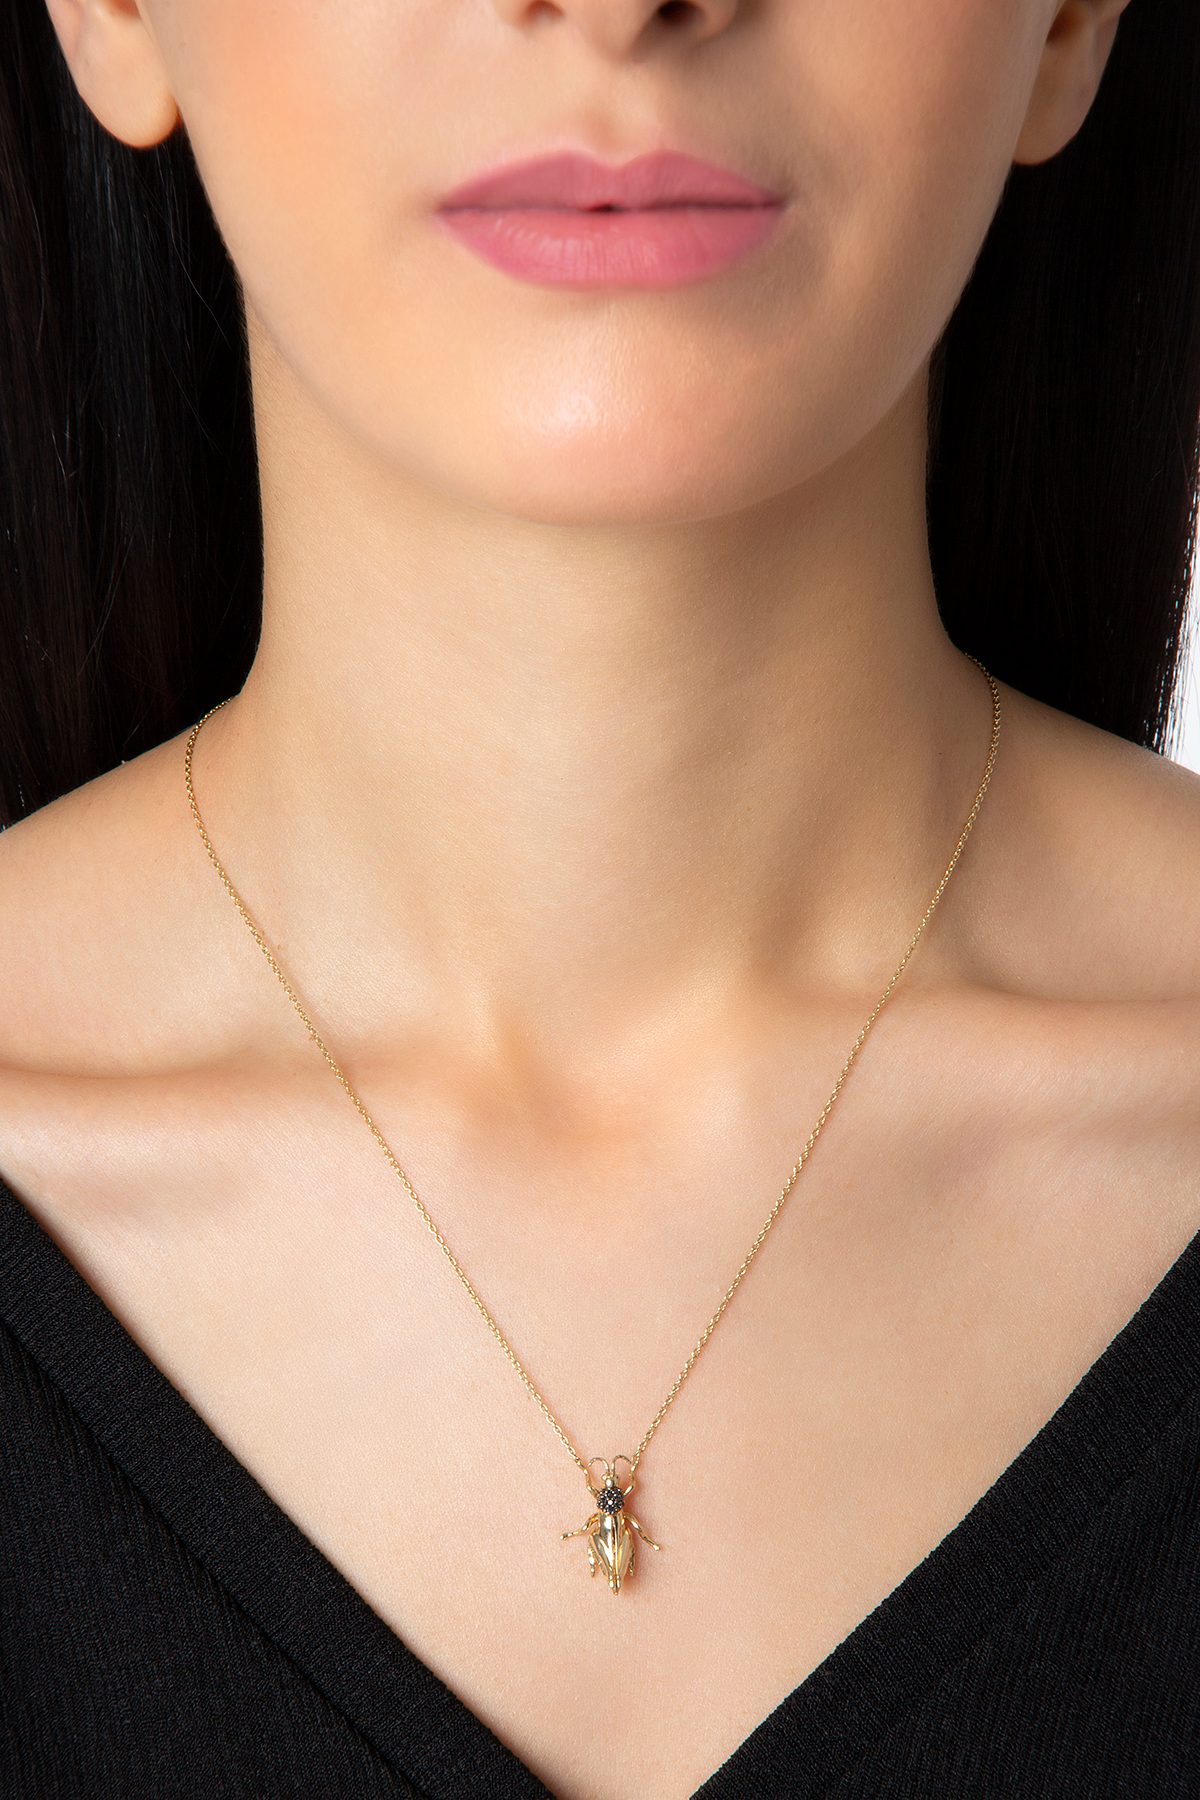 Grasshopper Necklace in Yellow Gold - Her Story Shop